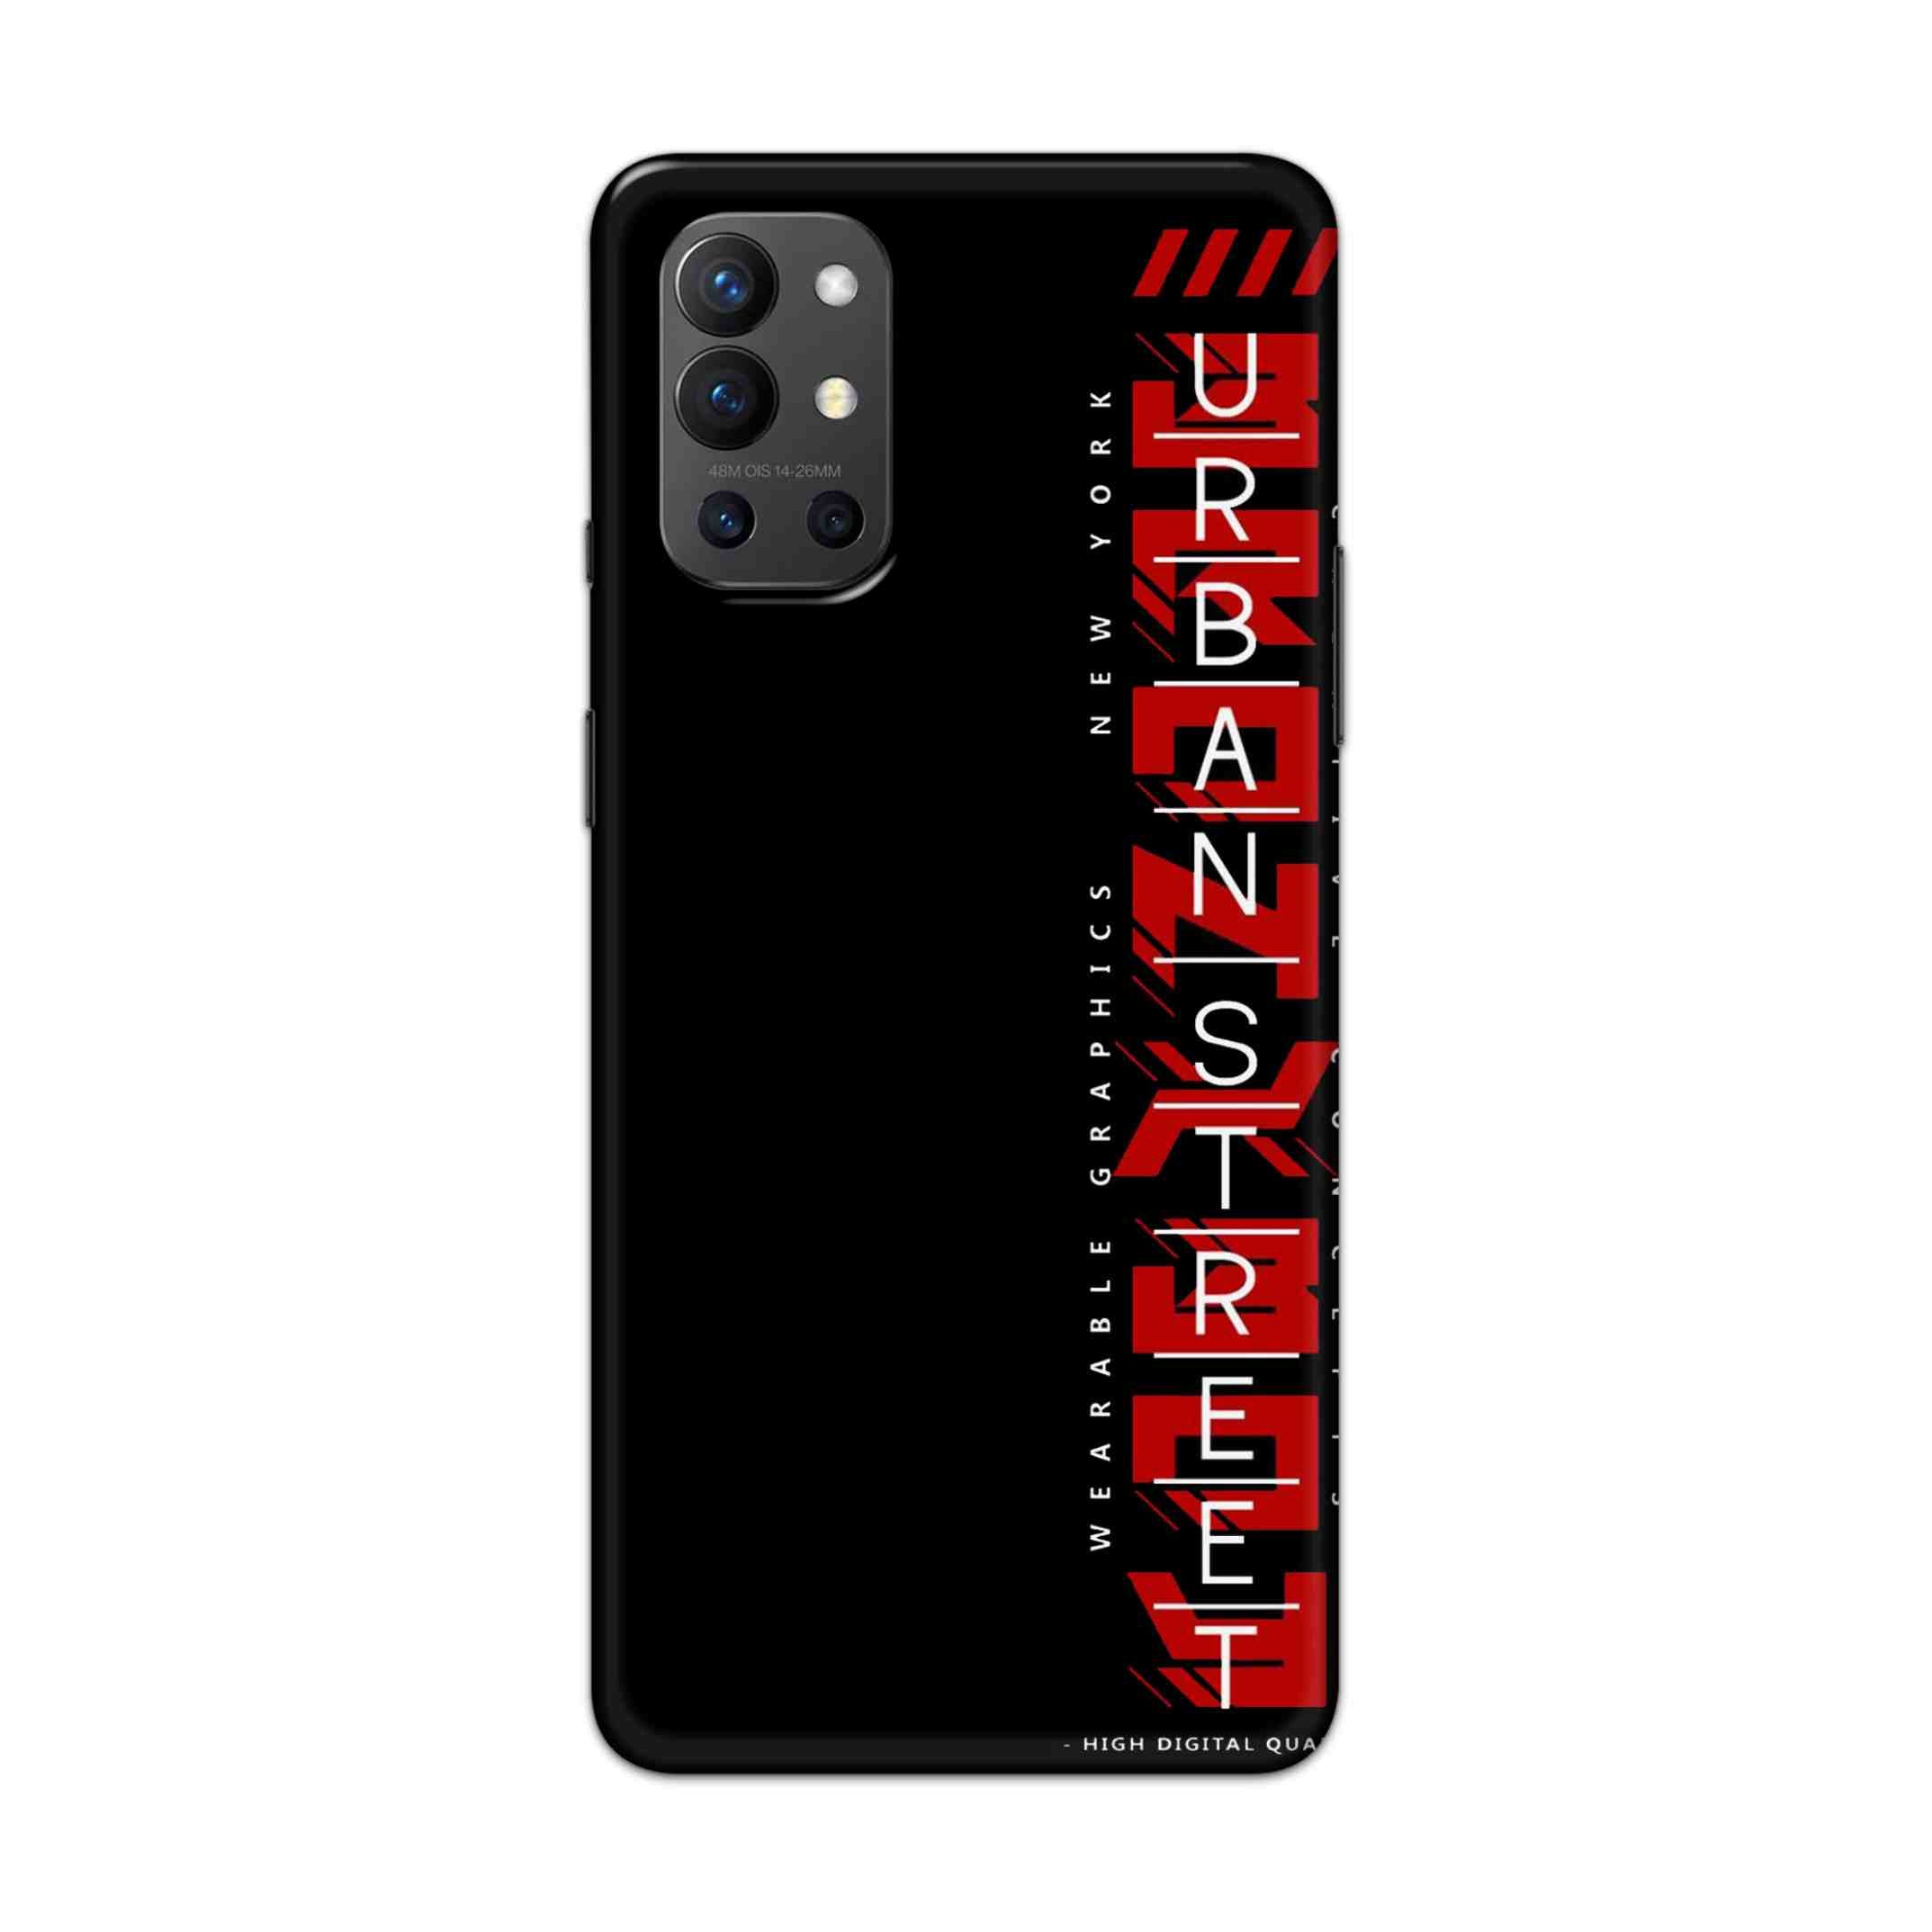 Buy Urban Street Hard Back Mobile Phone Case Cover For OnePlus 9R / 8T Online